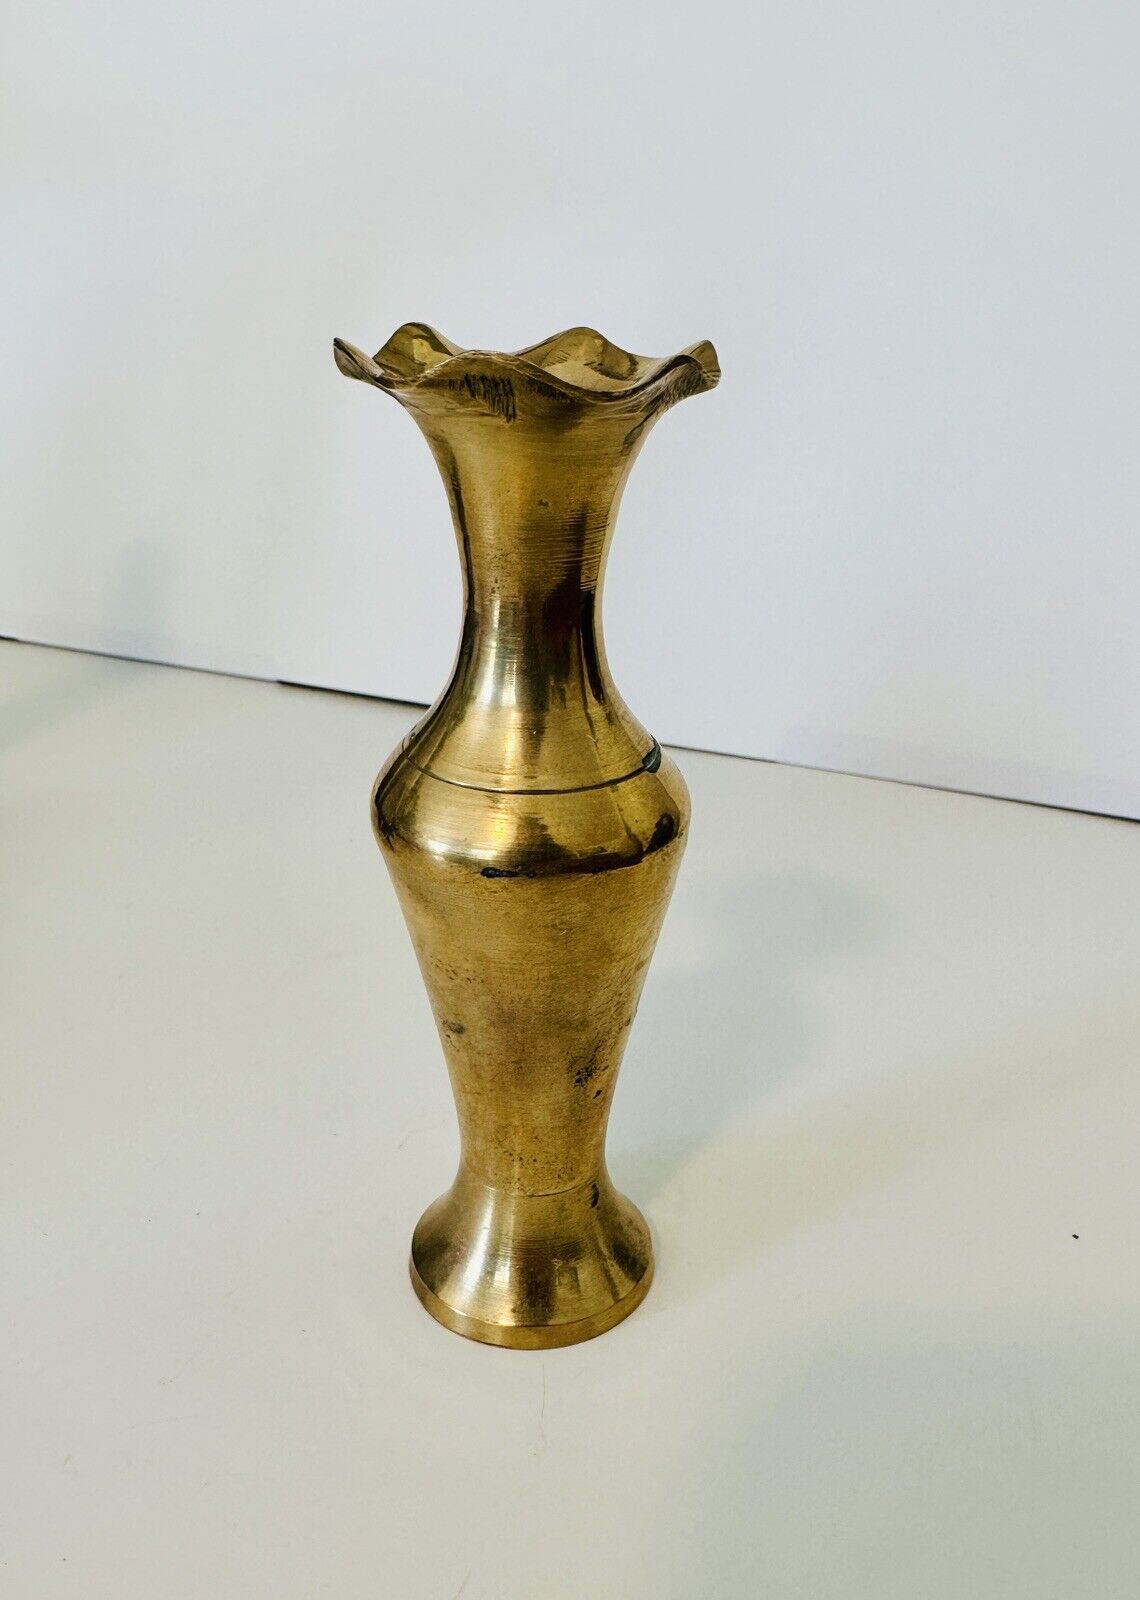 Vintage MCM Brass Vase Ruffle Top Etched Collar Mid Mod Decor